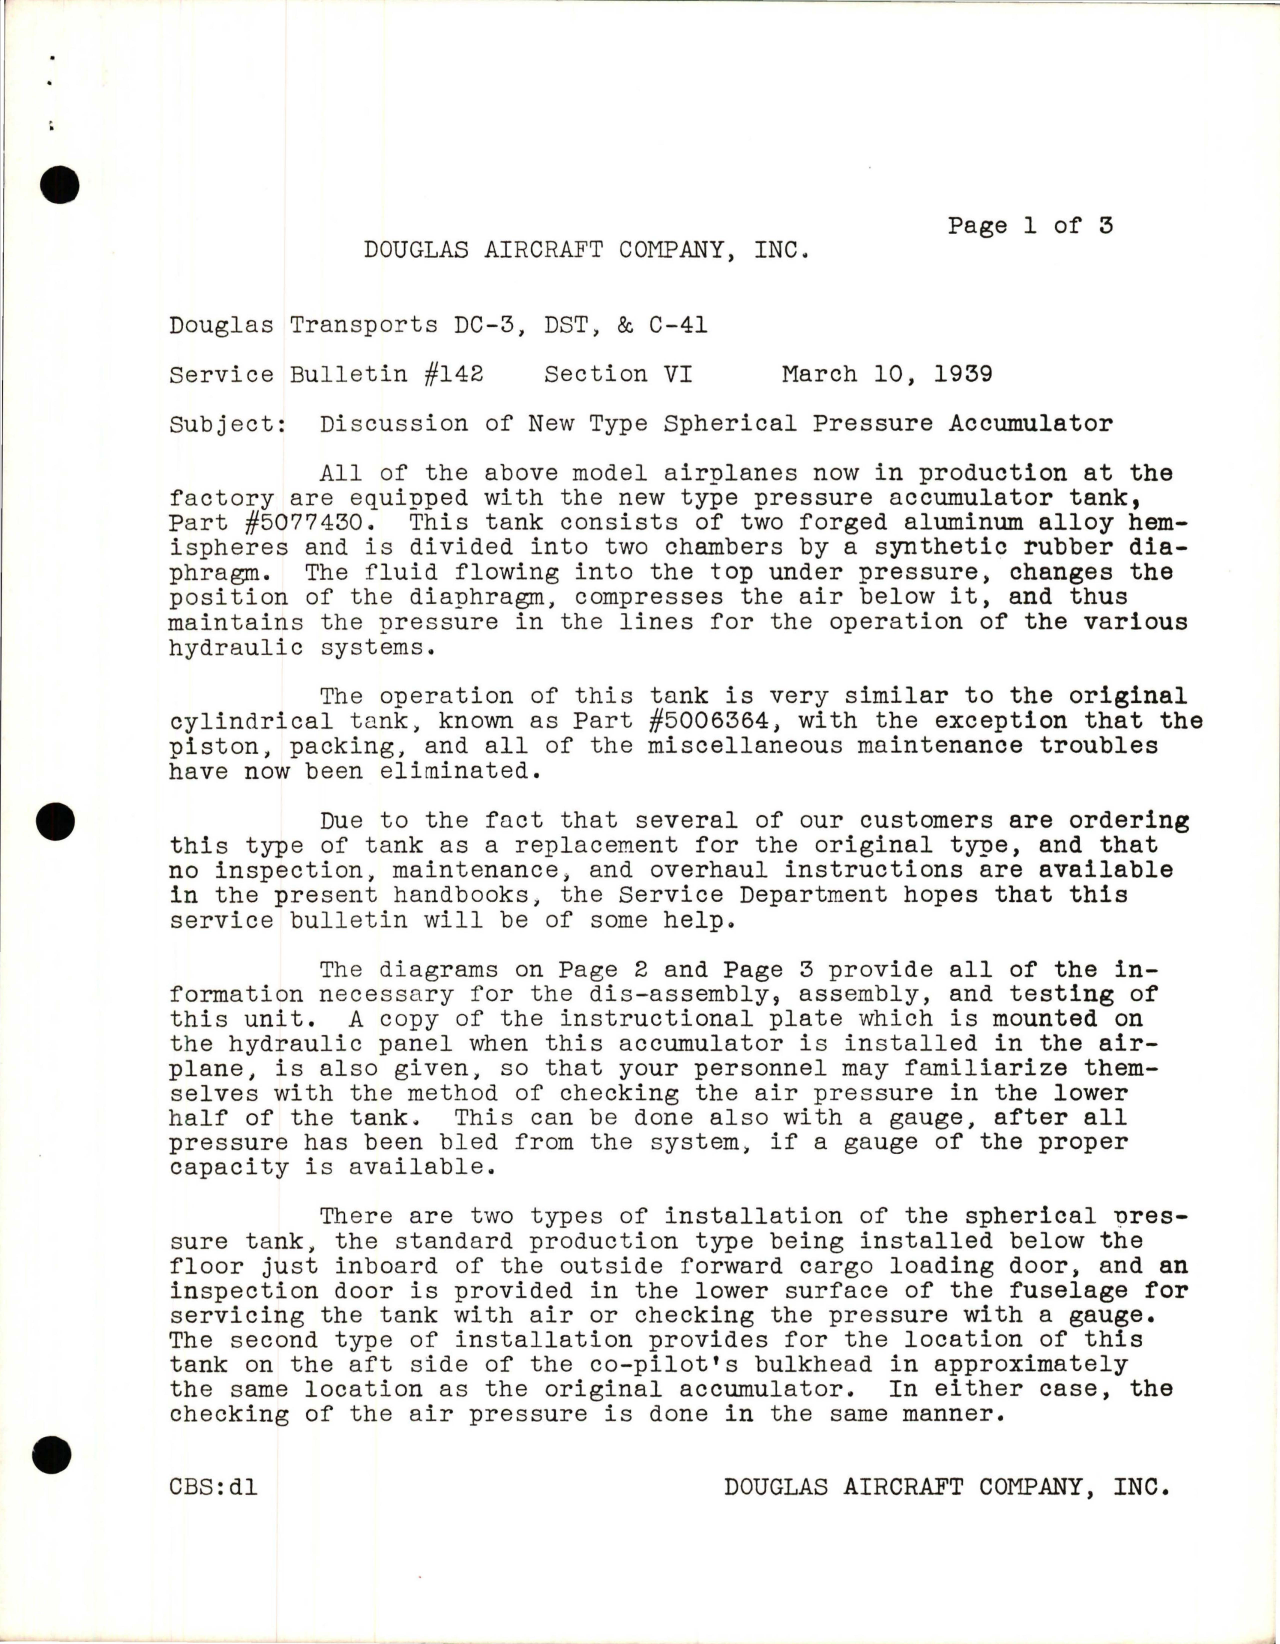 Sample page 1 from AirCorps Library document: Discussion of New Type Spherical Pressure Accumulator